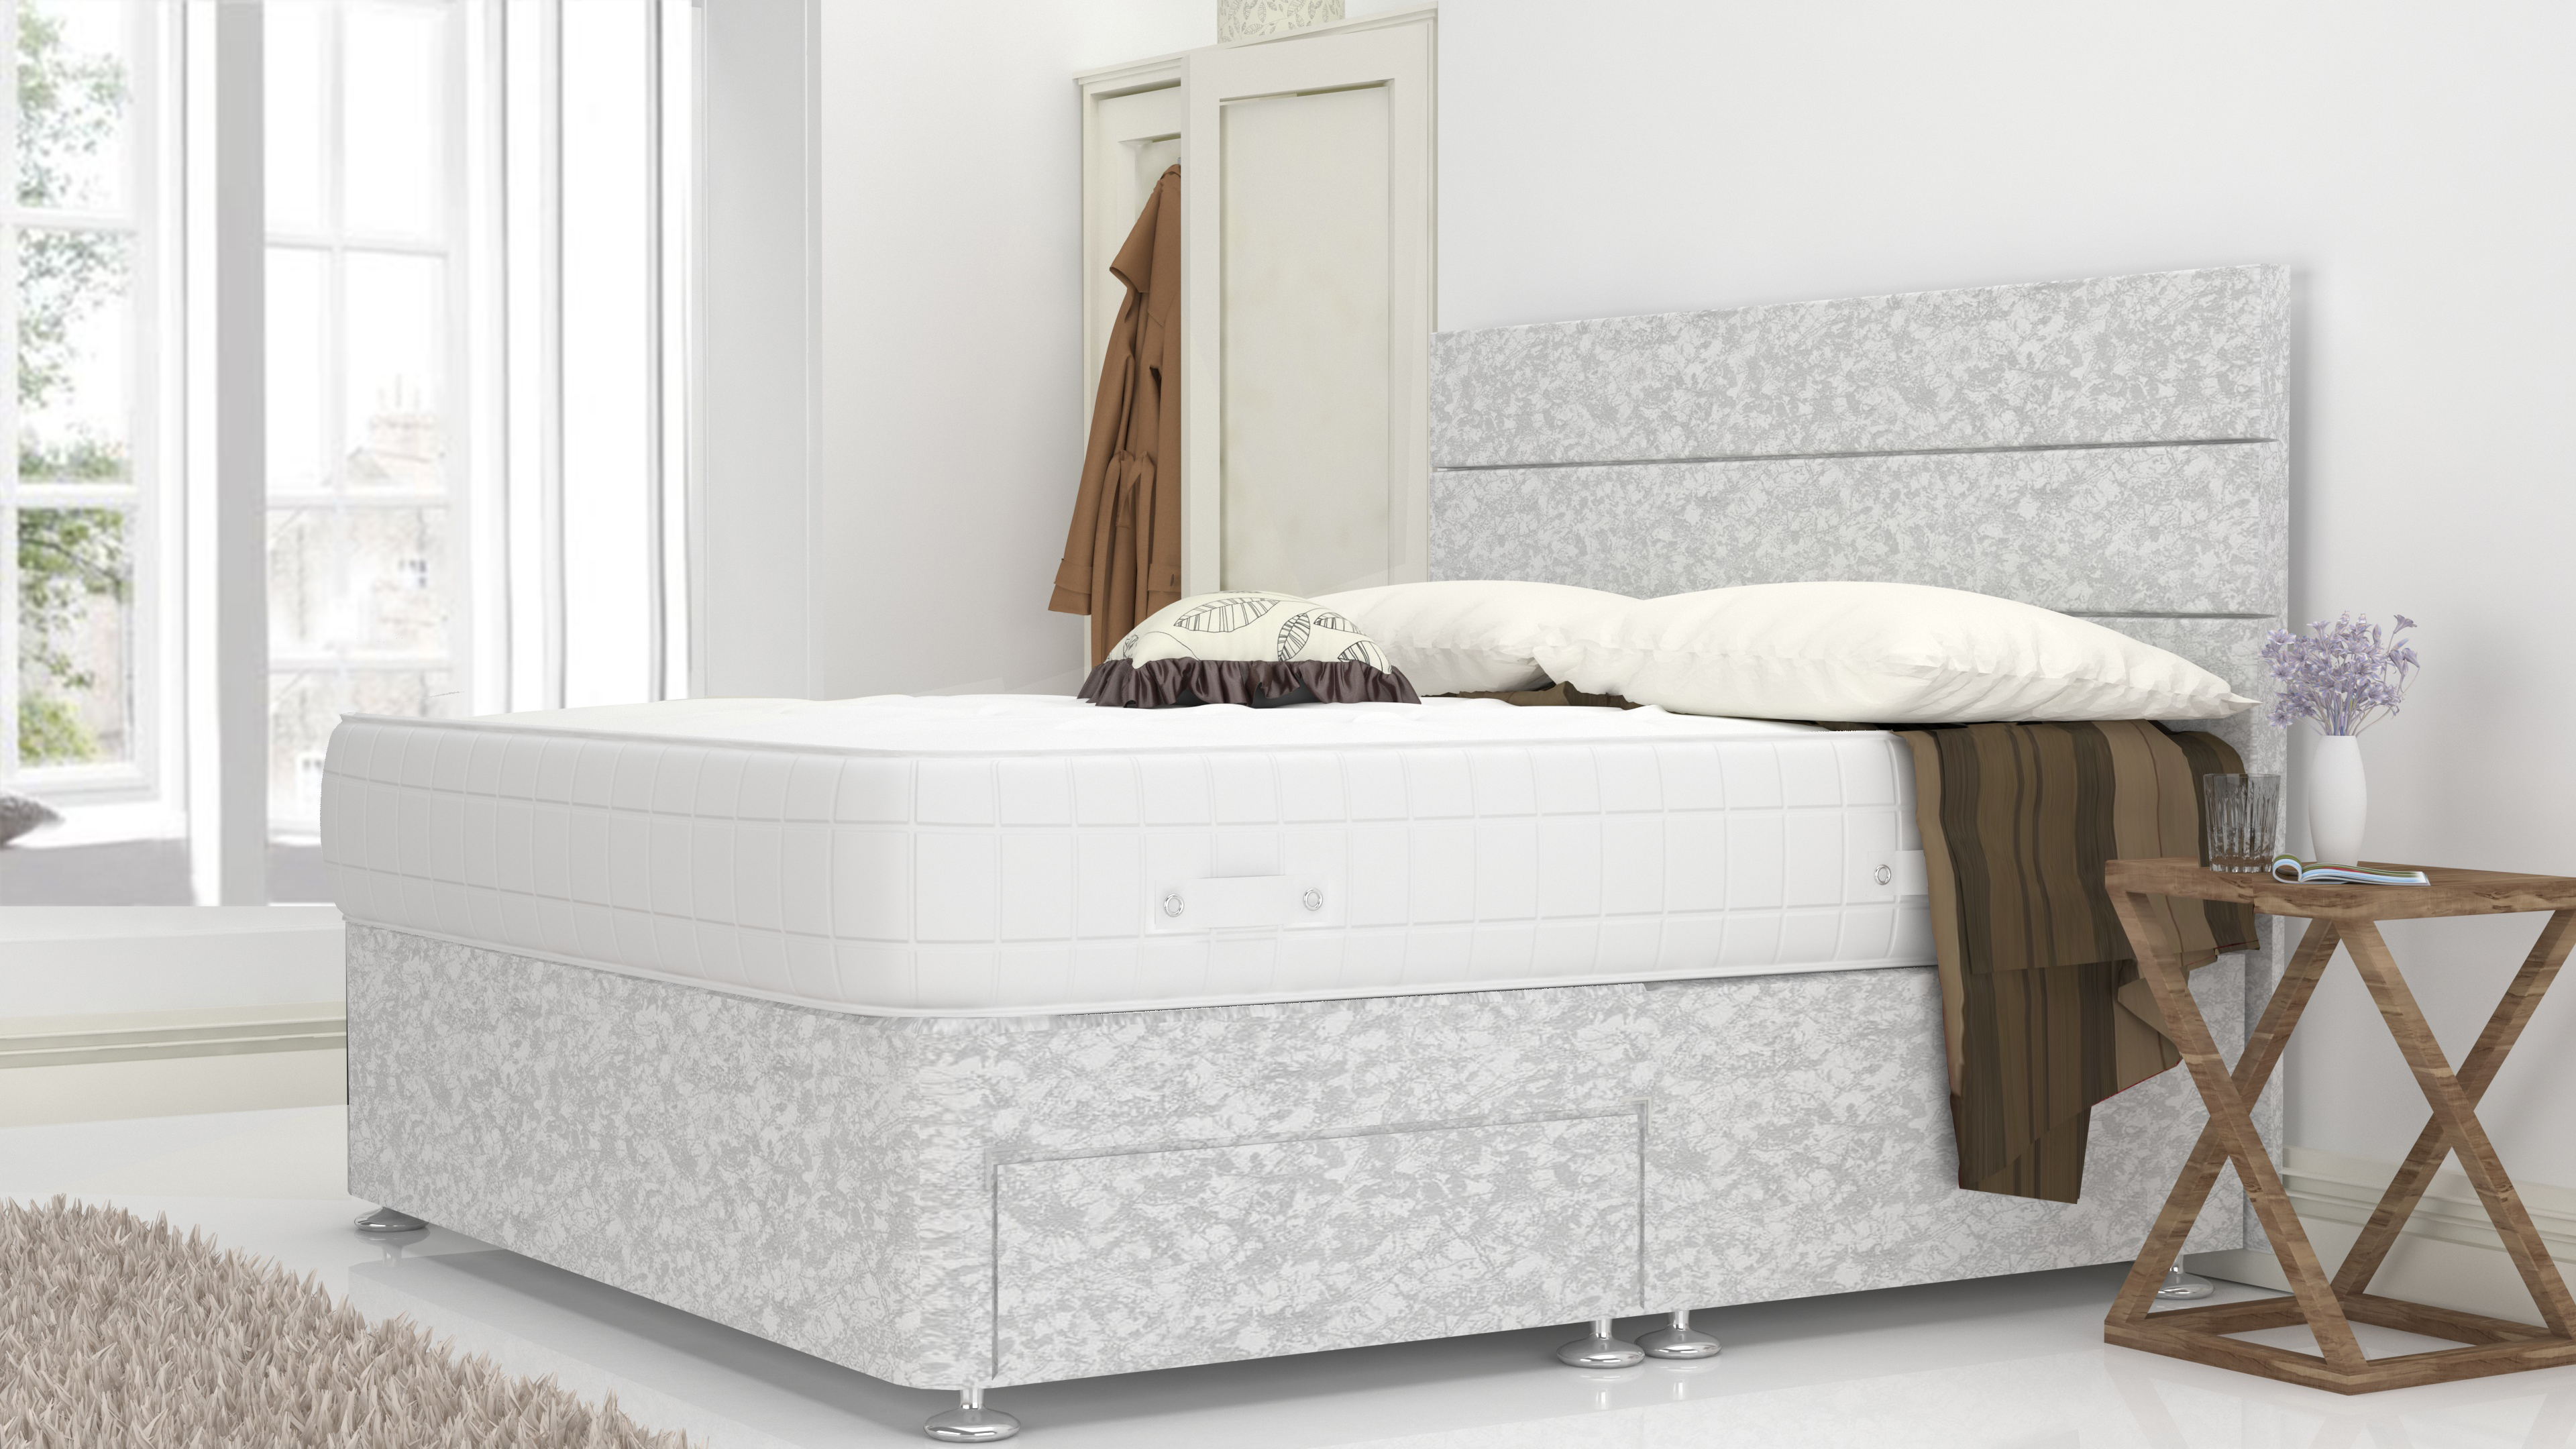 White Crushed Velvet 4FT 6" Divan Bed With 3 Panel Headboard (Included Feet) And Free Pillow Top Mattress